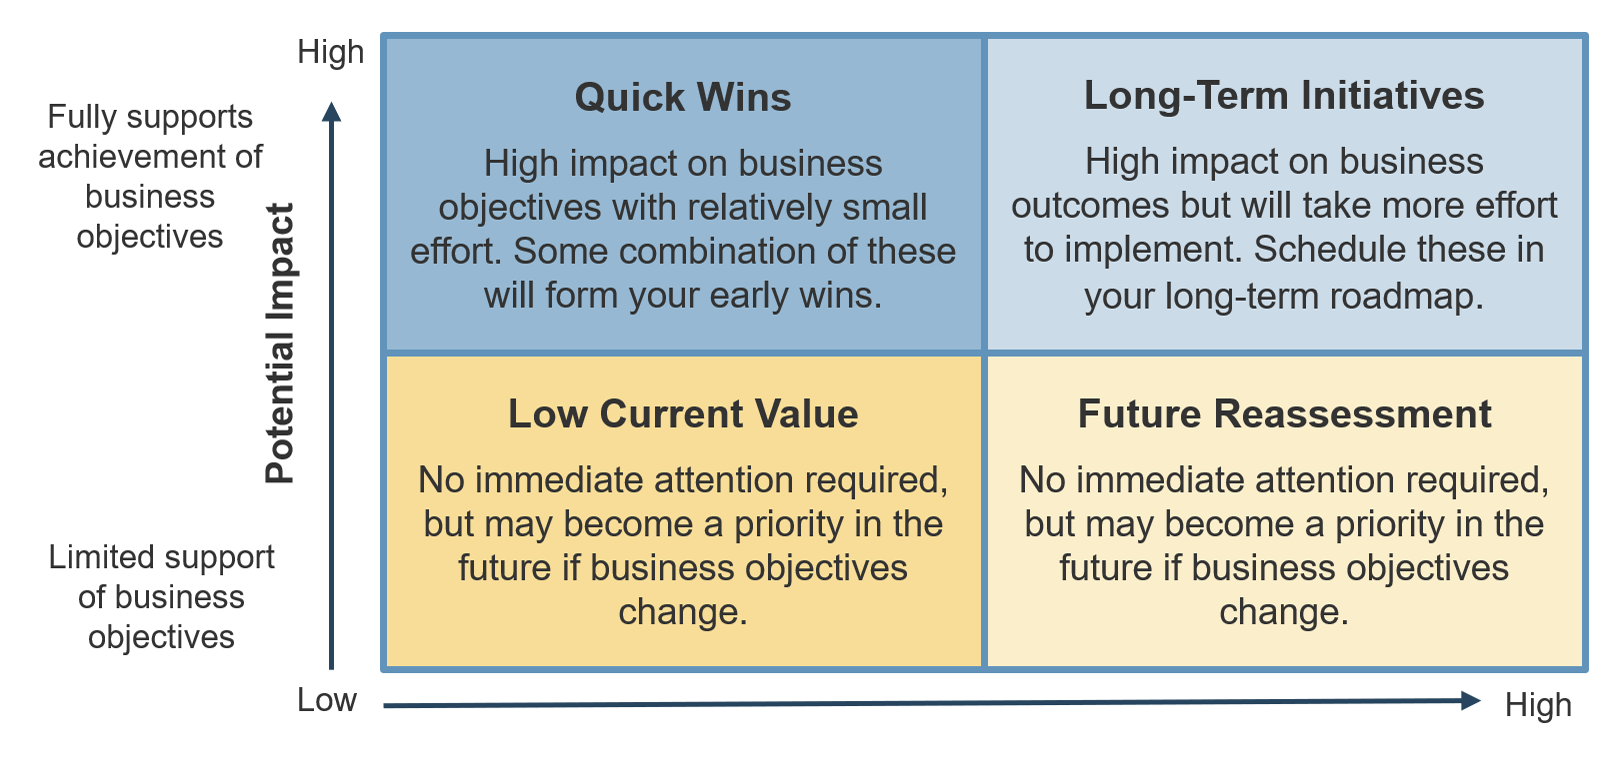 A matrix of initiative categories based on effort to achieve and alignment with business objectives. It is split into quadrants: the vertical axis is 'Potential Impact' with 'High, Fully supports achievement of business objectives' at the top and 'Low, Limited support of business objectives' at the bottom; the horizontal axis is 'Effort' with 'Low' on the left and 'High' on the right. Low impact, low effort is 'Low Current Value, No immediate attention required, but may become a priority in the future if business objectives change'. Low impact, high effort is 'Future Reassessment, No immediate attention required, but may become a priority in the future if business objectives change'. High impact, high effort is 'Long-Term Initiatives, High impact on business outcomes but will take more effort to implement. Schedule these in your long-term roadmap'. High impact, low effort is 'Quick Wins, High impact on business objectives with relatively small effort. Some combination of these will form your early wins'.